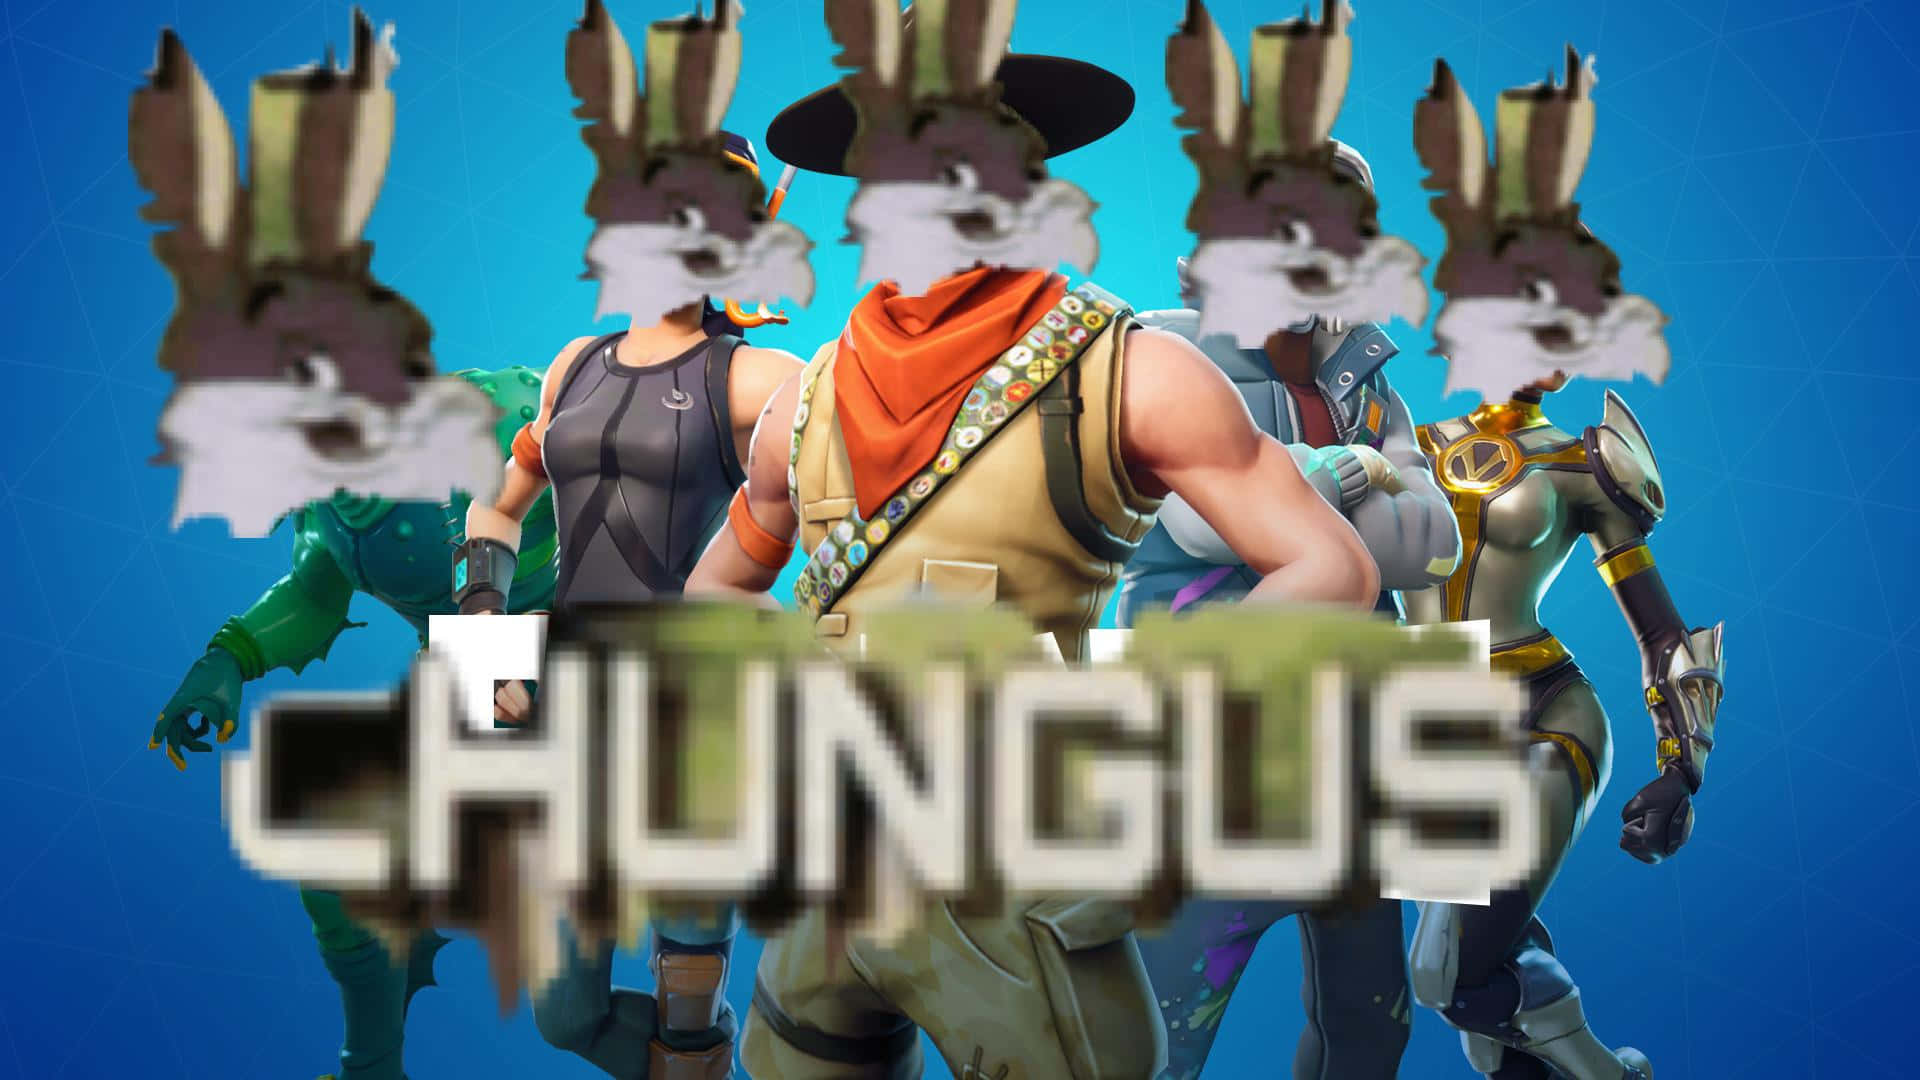 A Group Of People With The Word Chuggus